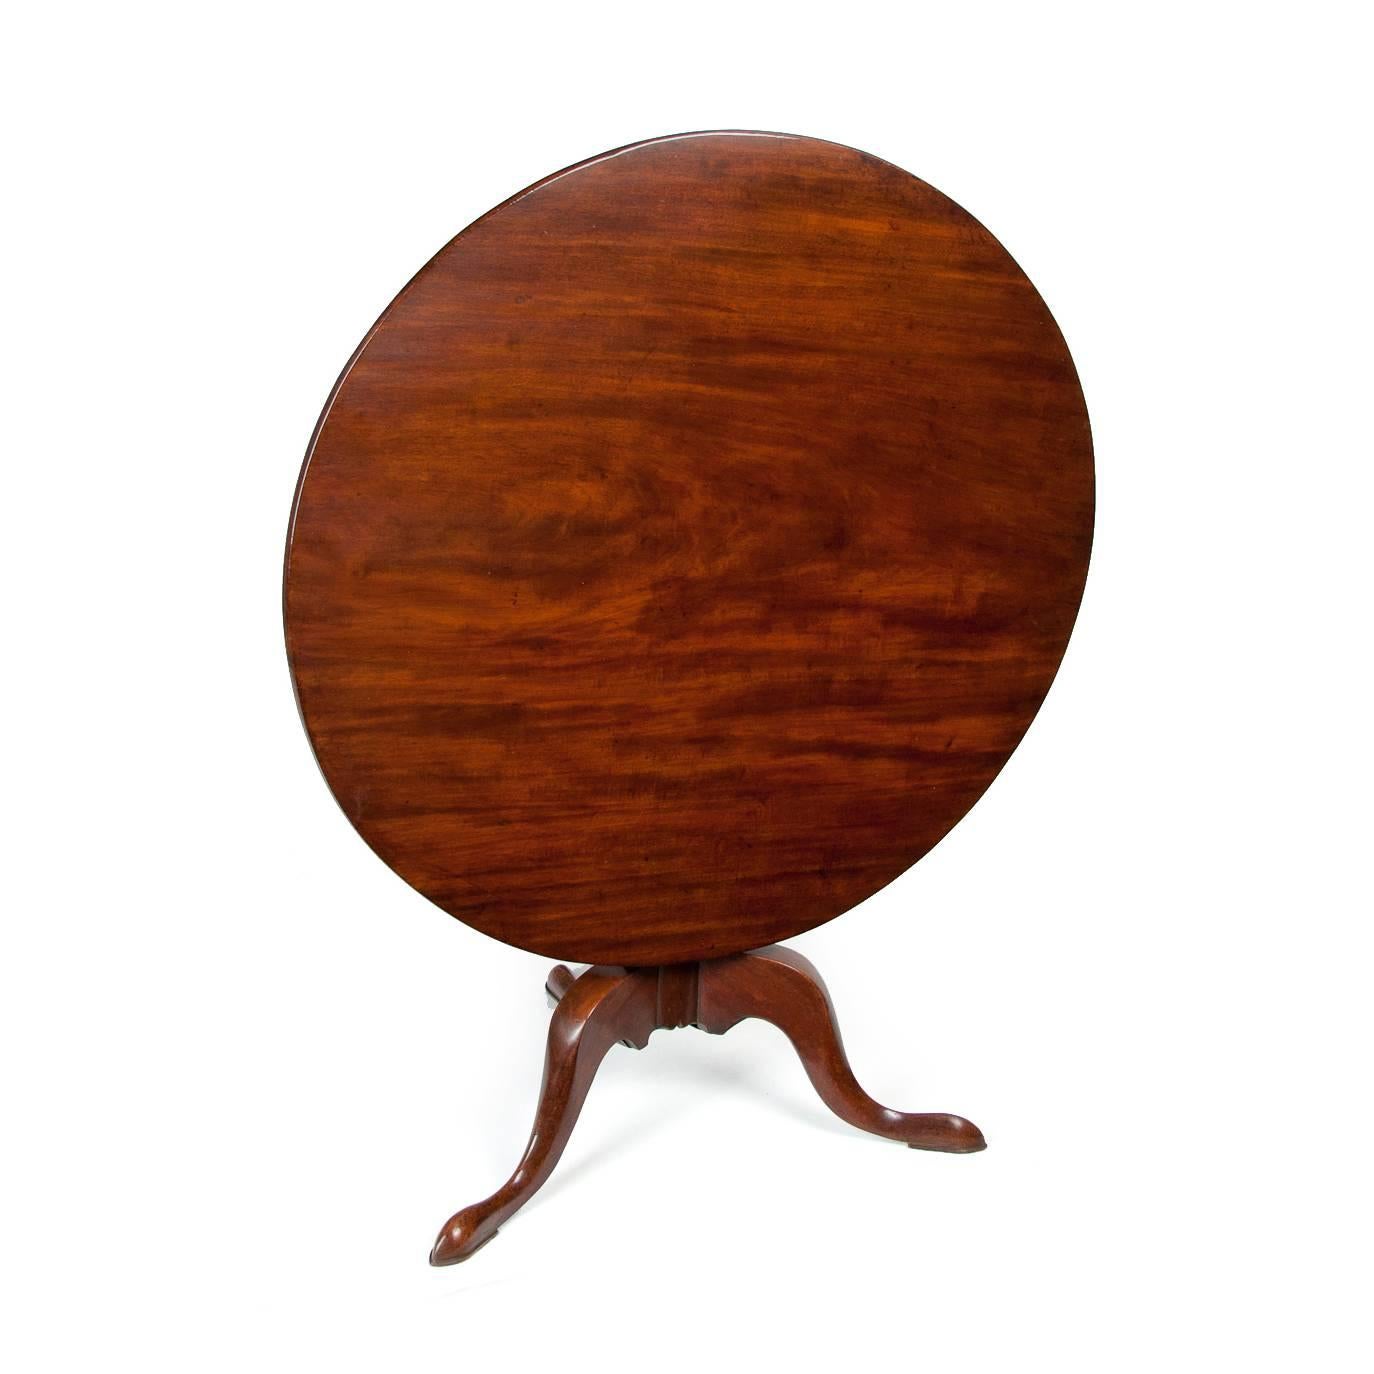 English George III Mahogany Tripod Table of Large Proportions